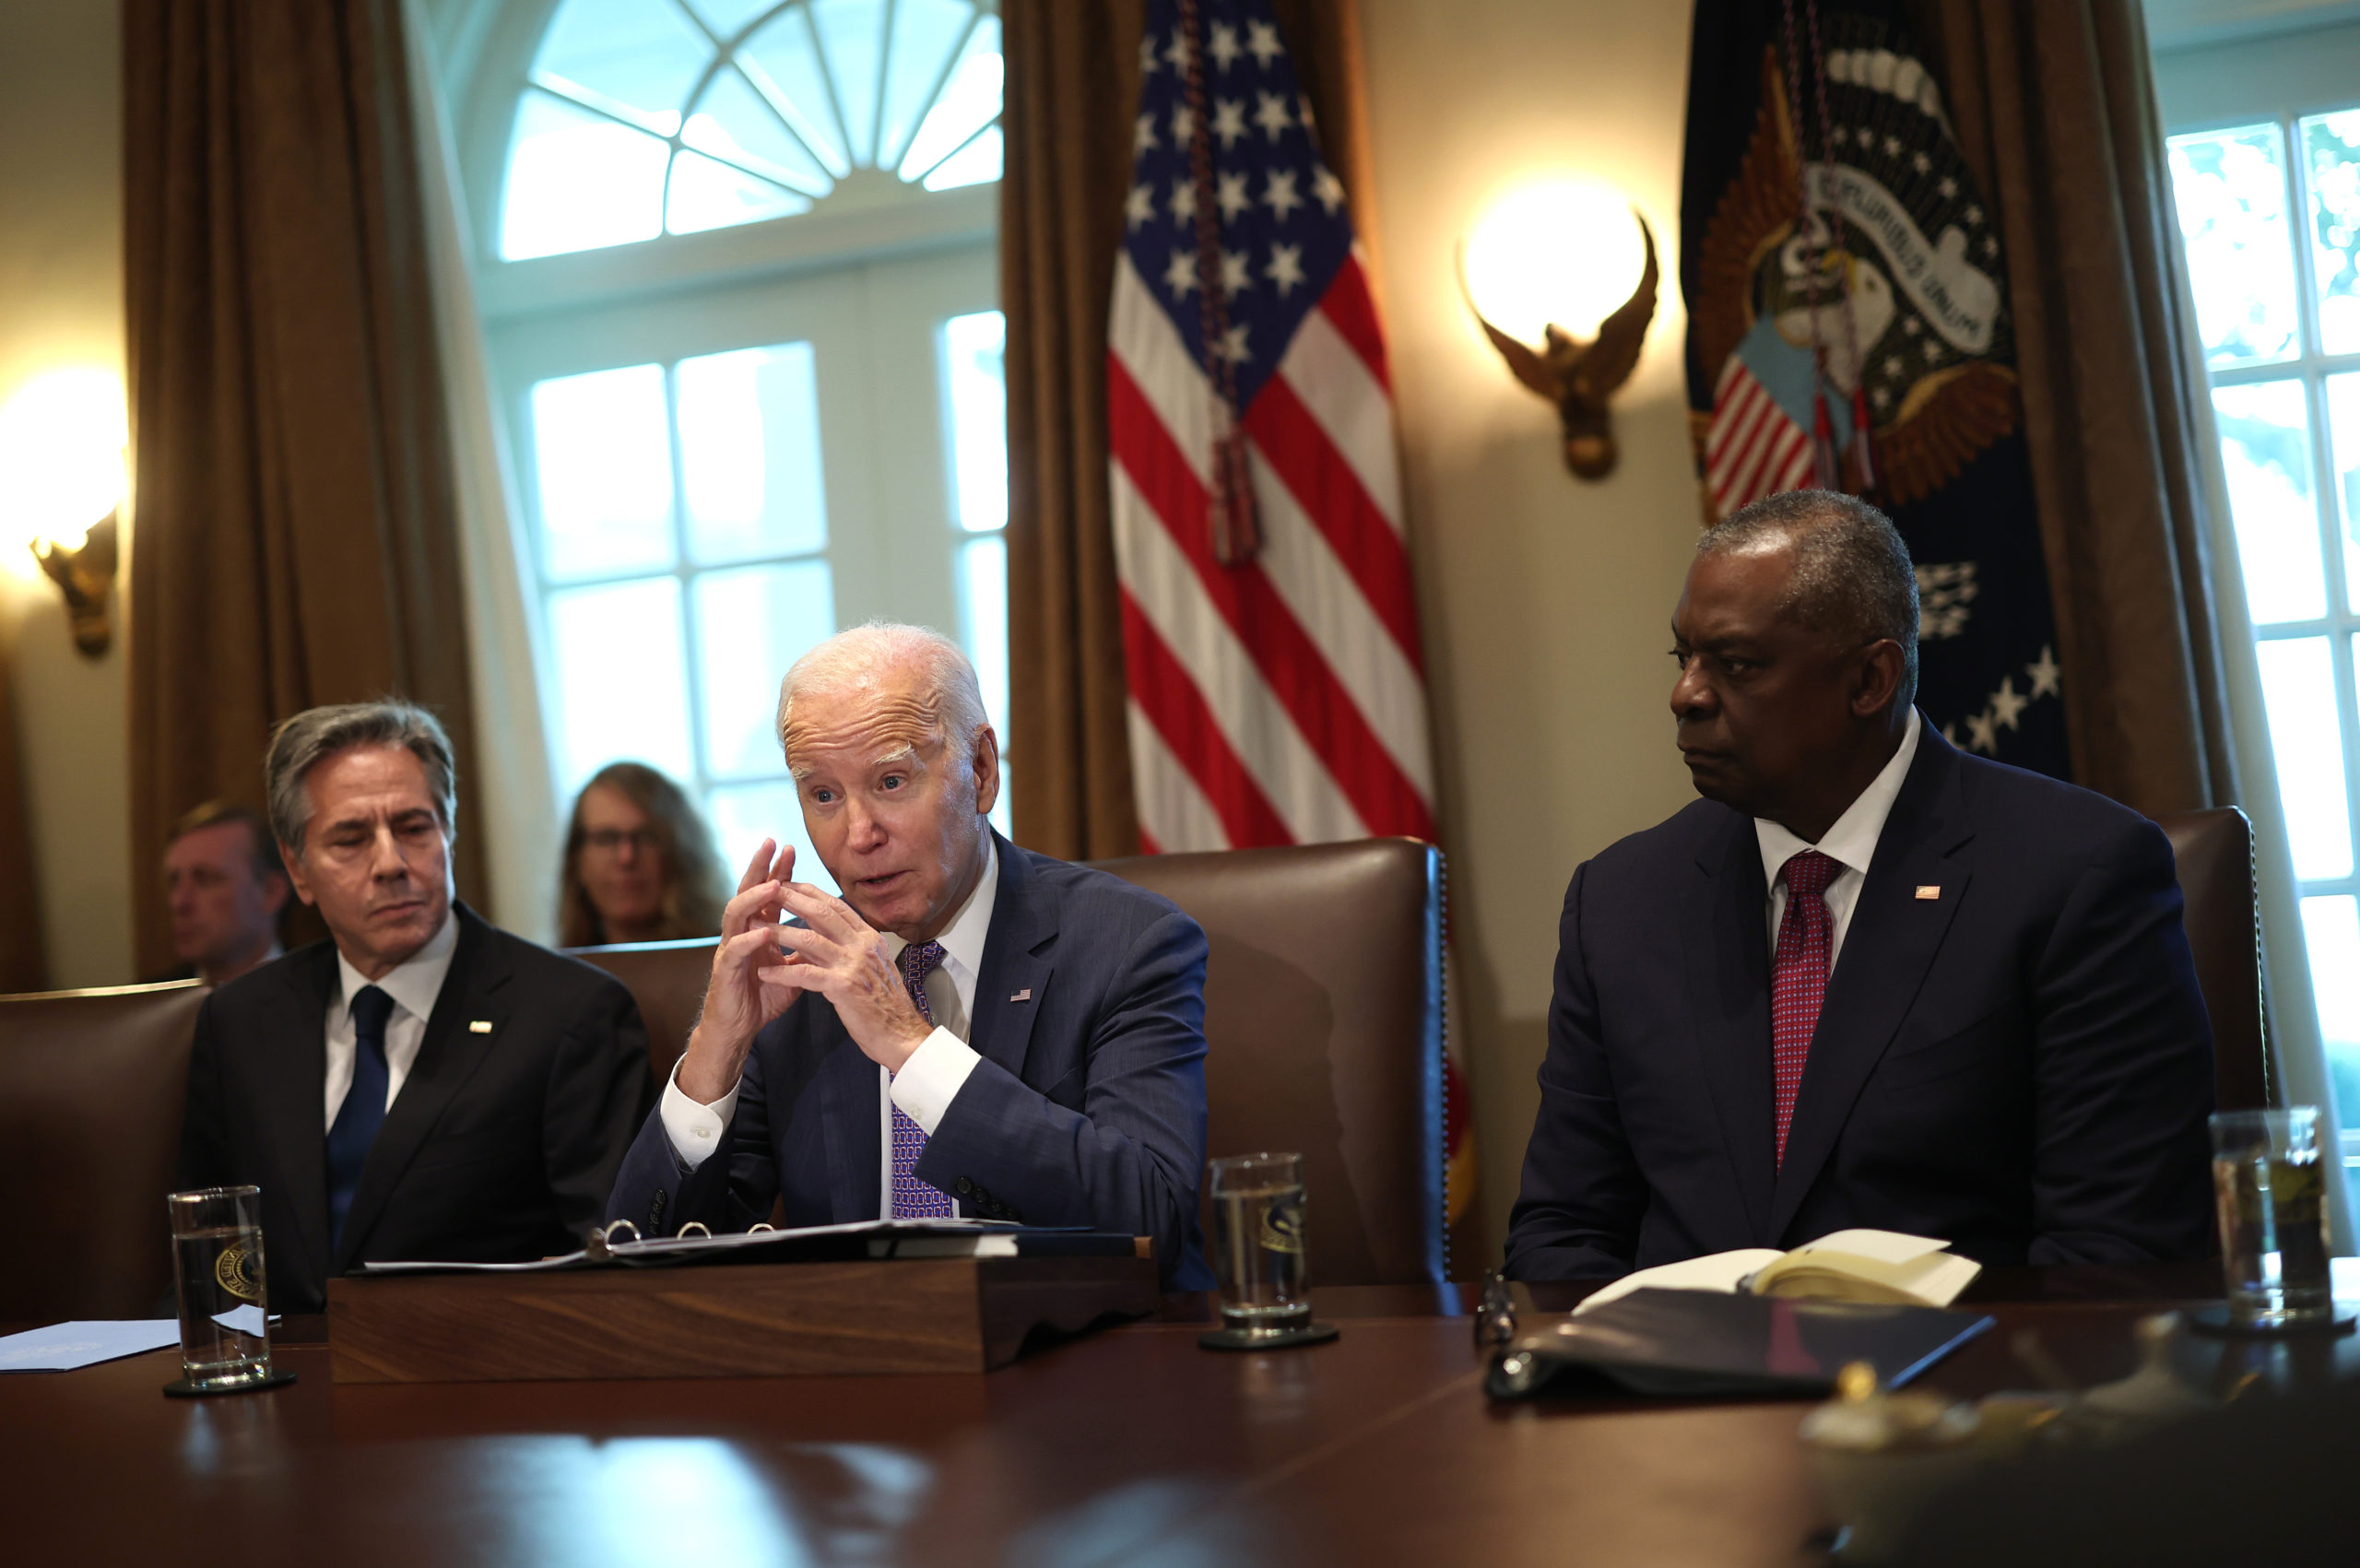 U.S. President Joe Biden holds a Cabinet meeting at the White House on October 02, 2023 in Washington, DC. Biden held the meeting to discuss economic legislation, artificial intelligence, and gun violence. Biden was joined by Secretary of State Antony Blinken (L) and Defense Secretary Lloyd Austin. (Photo by Kevin Dietsch/Getty Images)